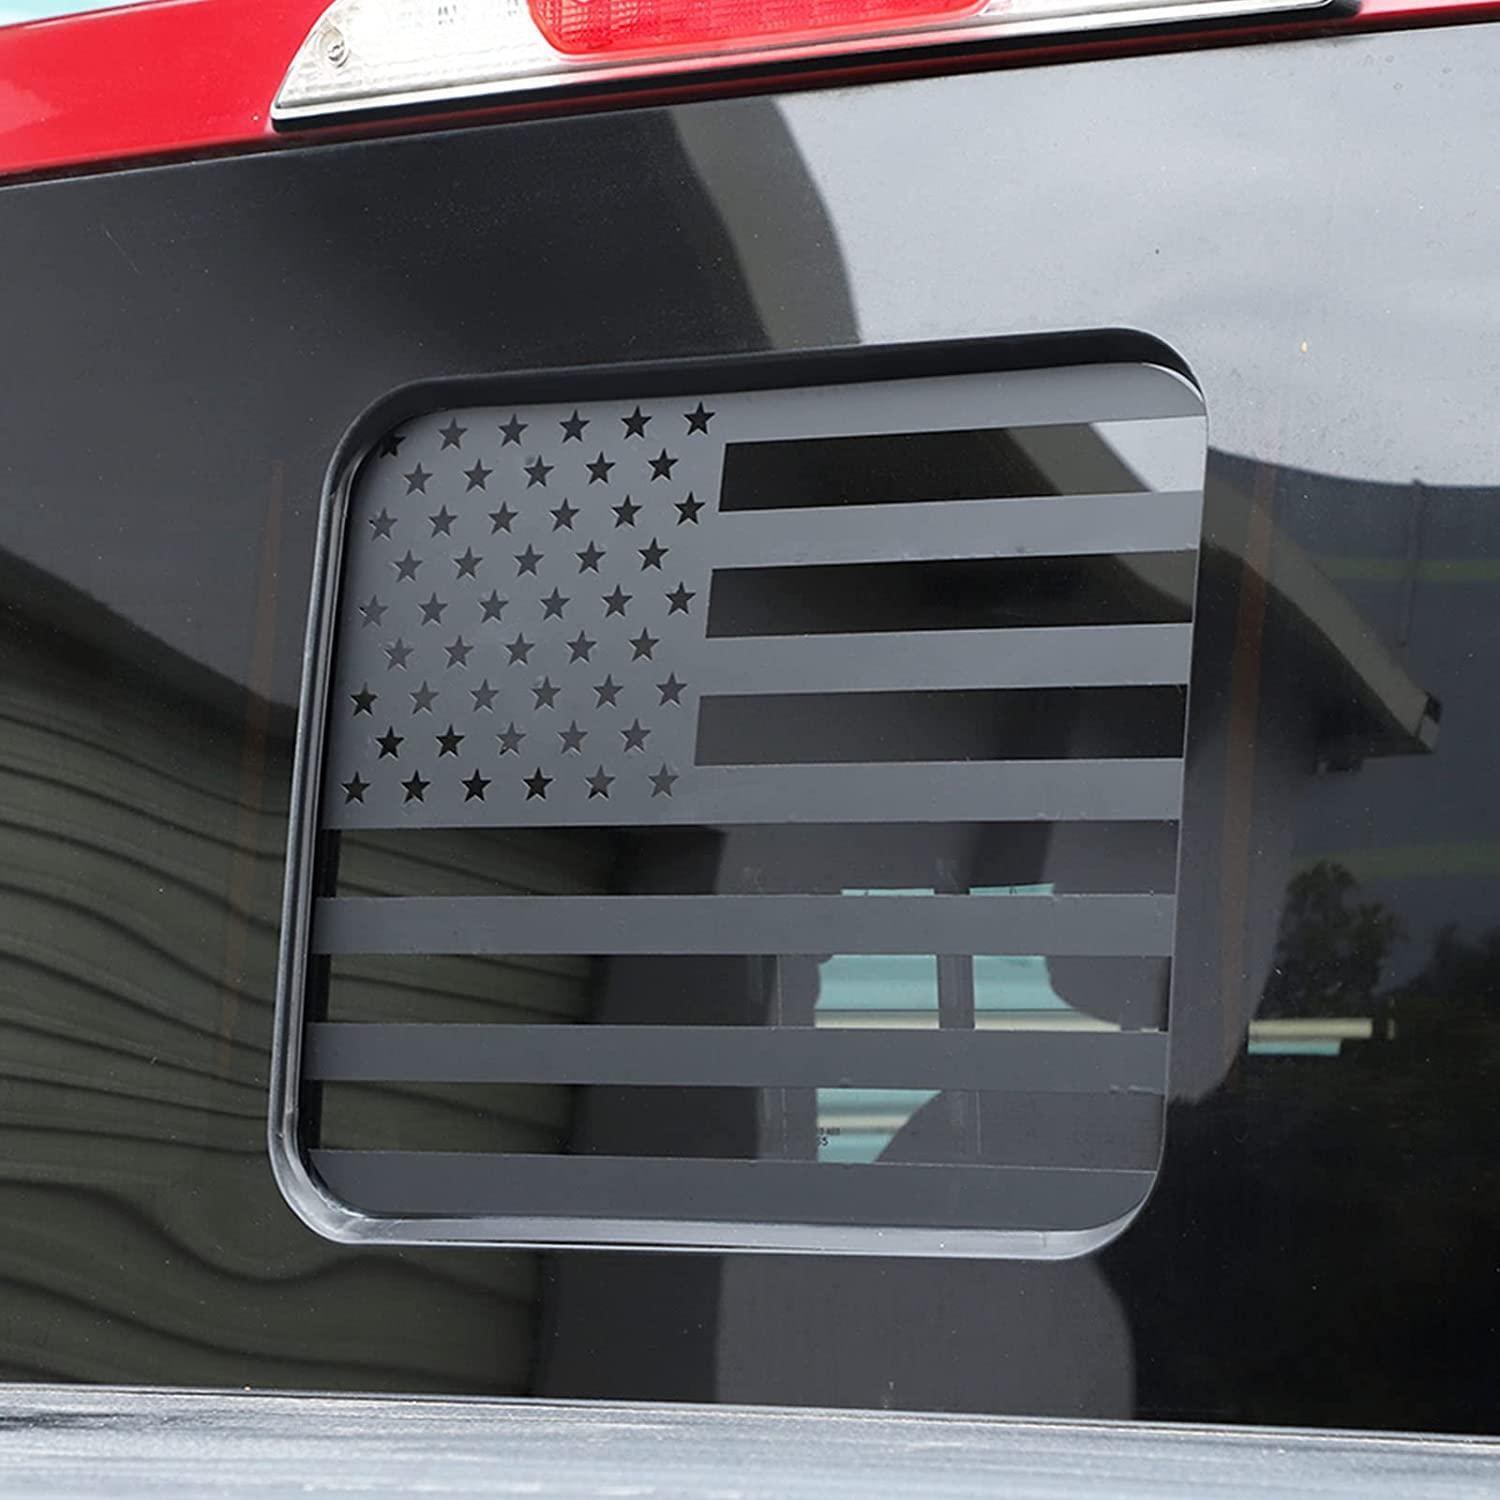 Zxiaochun Rear Middle Window American Flag Decal for Ford F150 F250 F350 2015-20